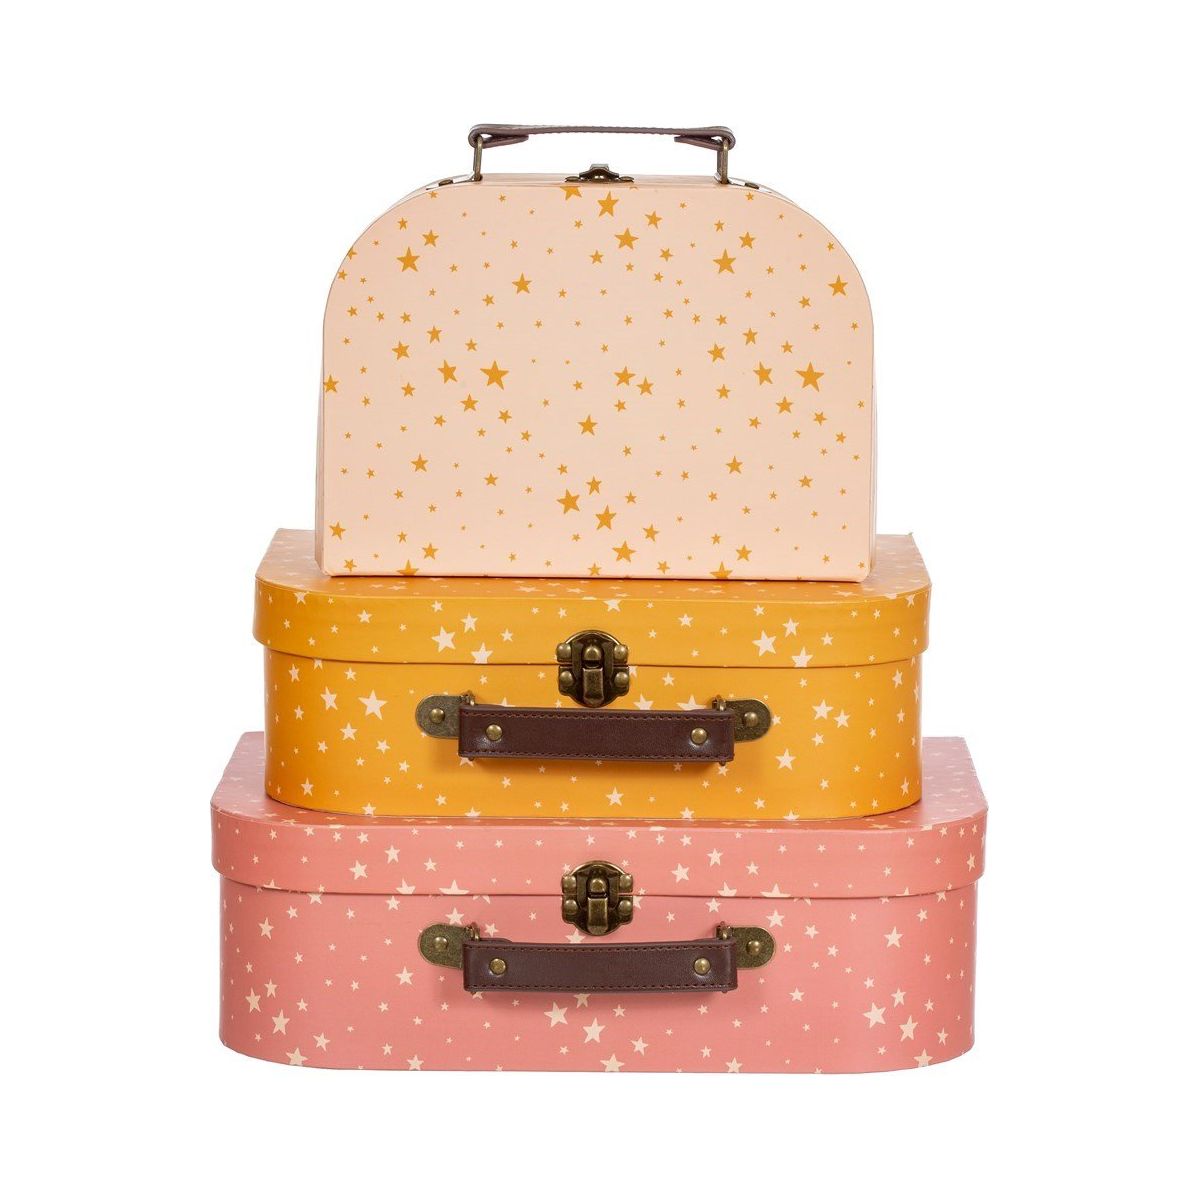 Little Stars Suitcases - Set of 3 - Ashton and Finch